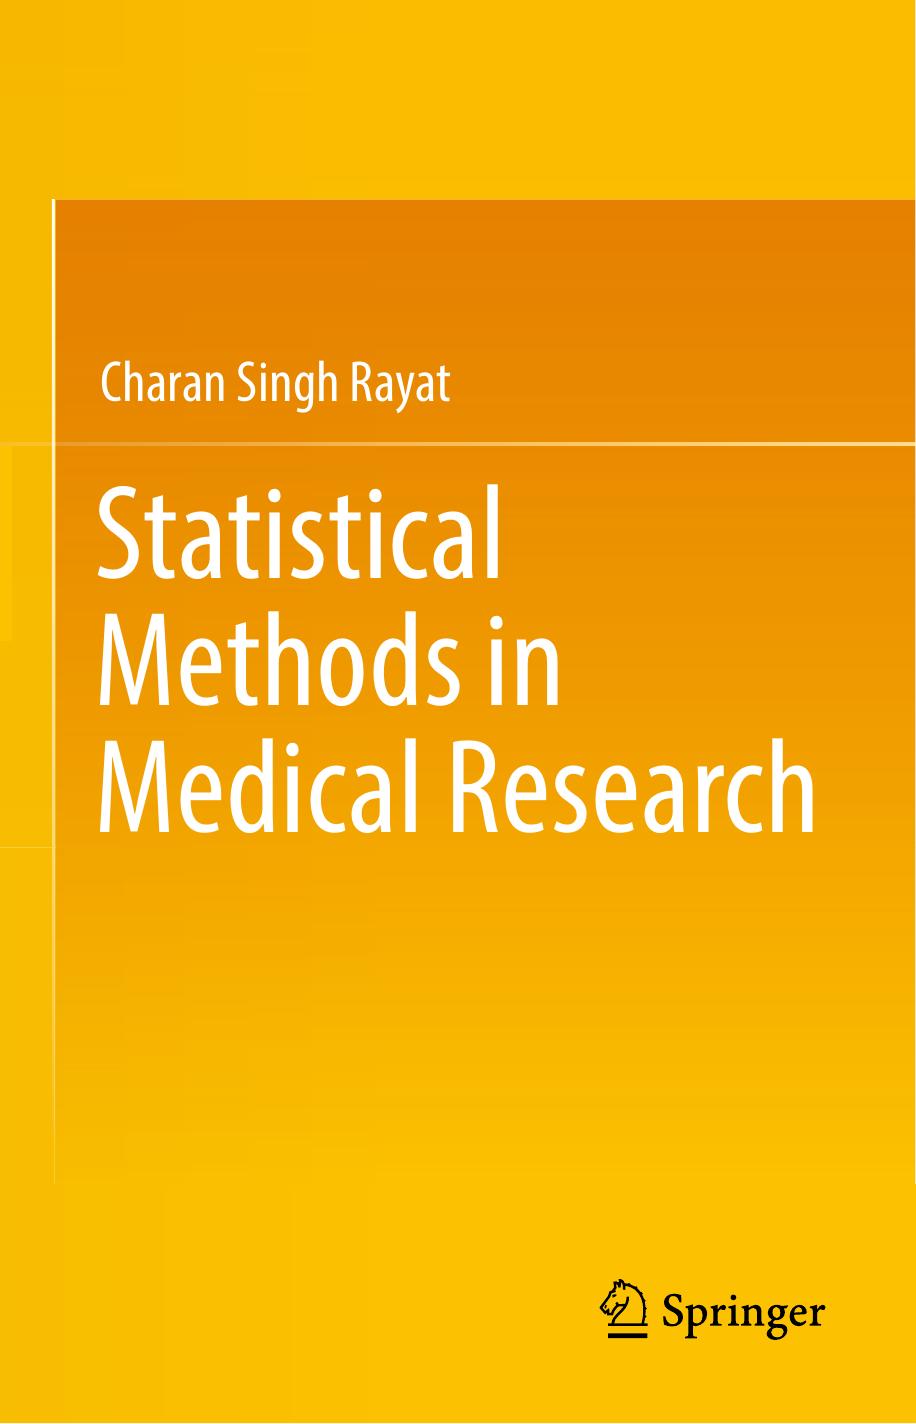 Statistical Methods in Medical Research by Charan Singh Rayat